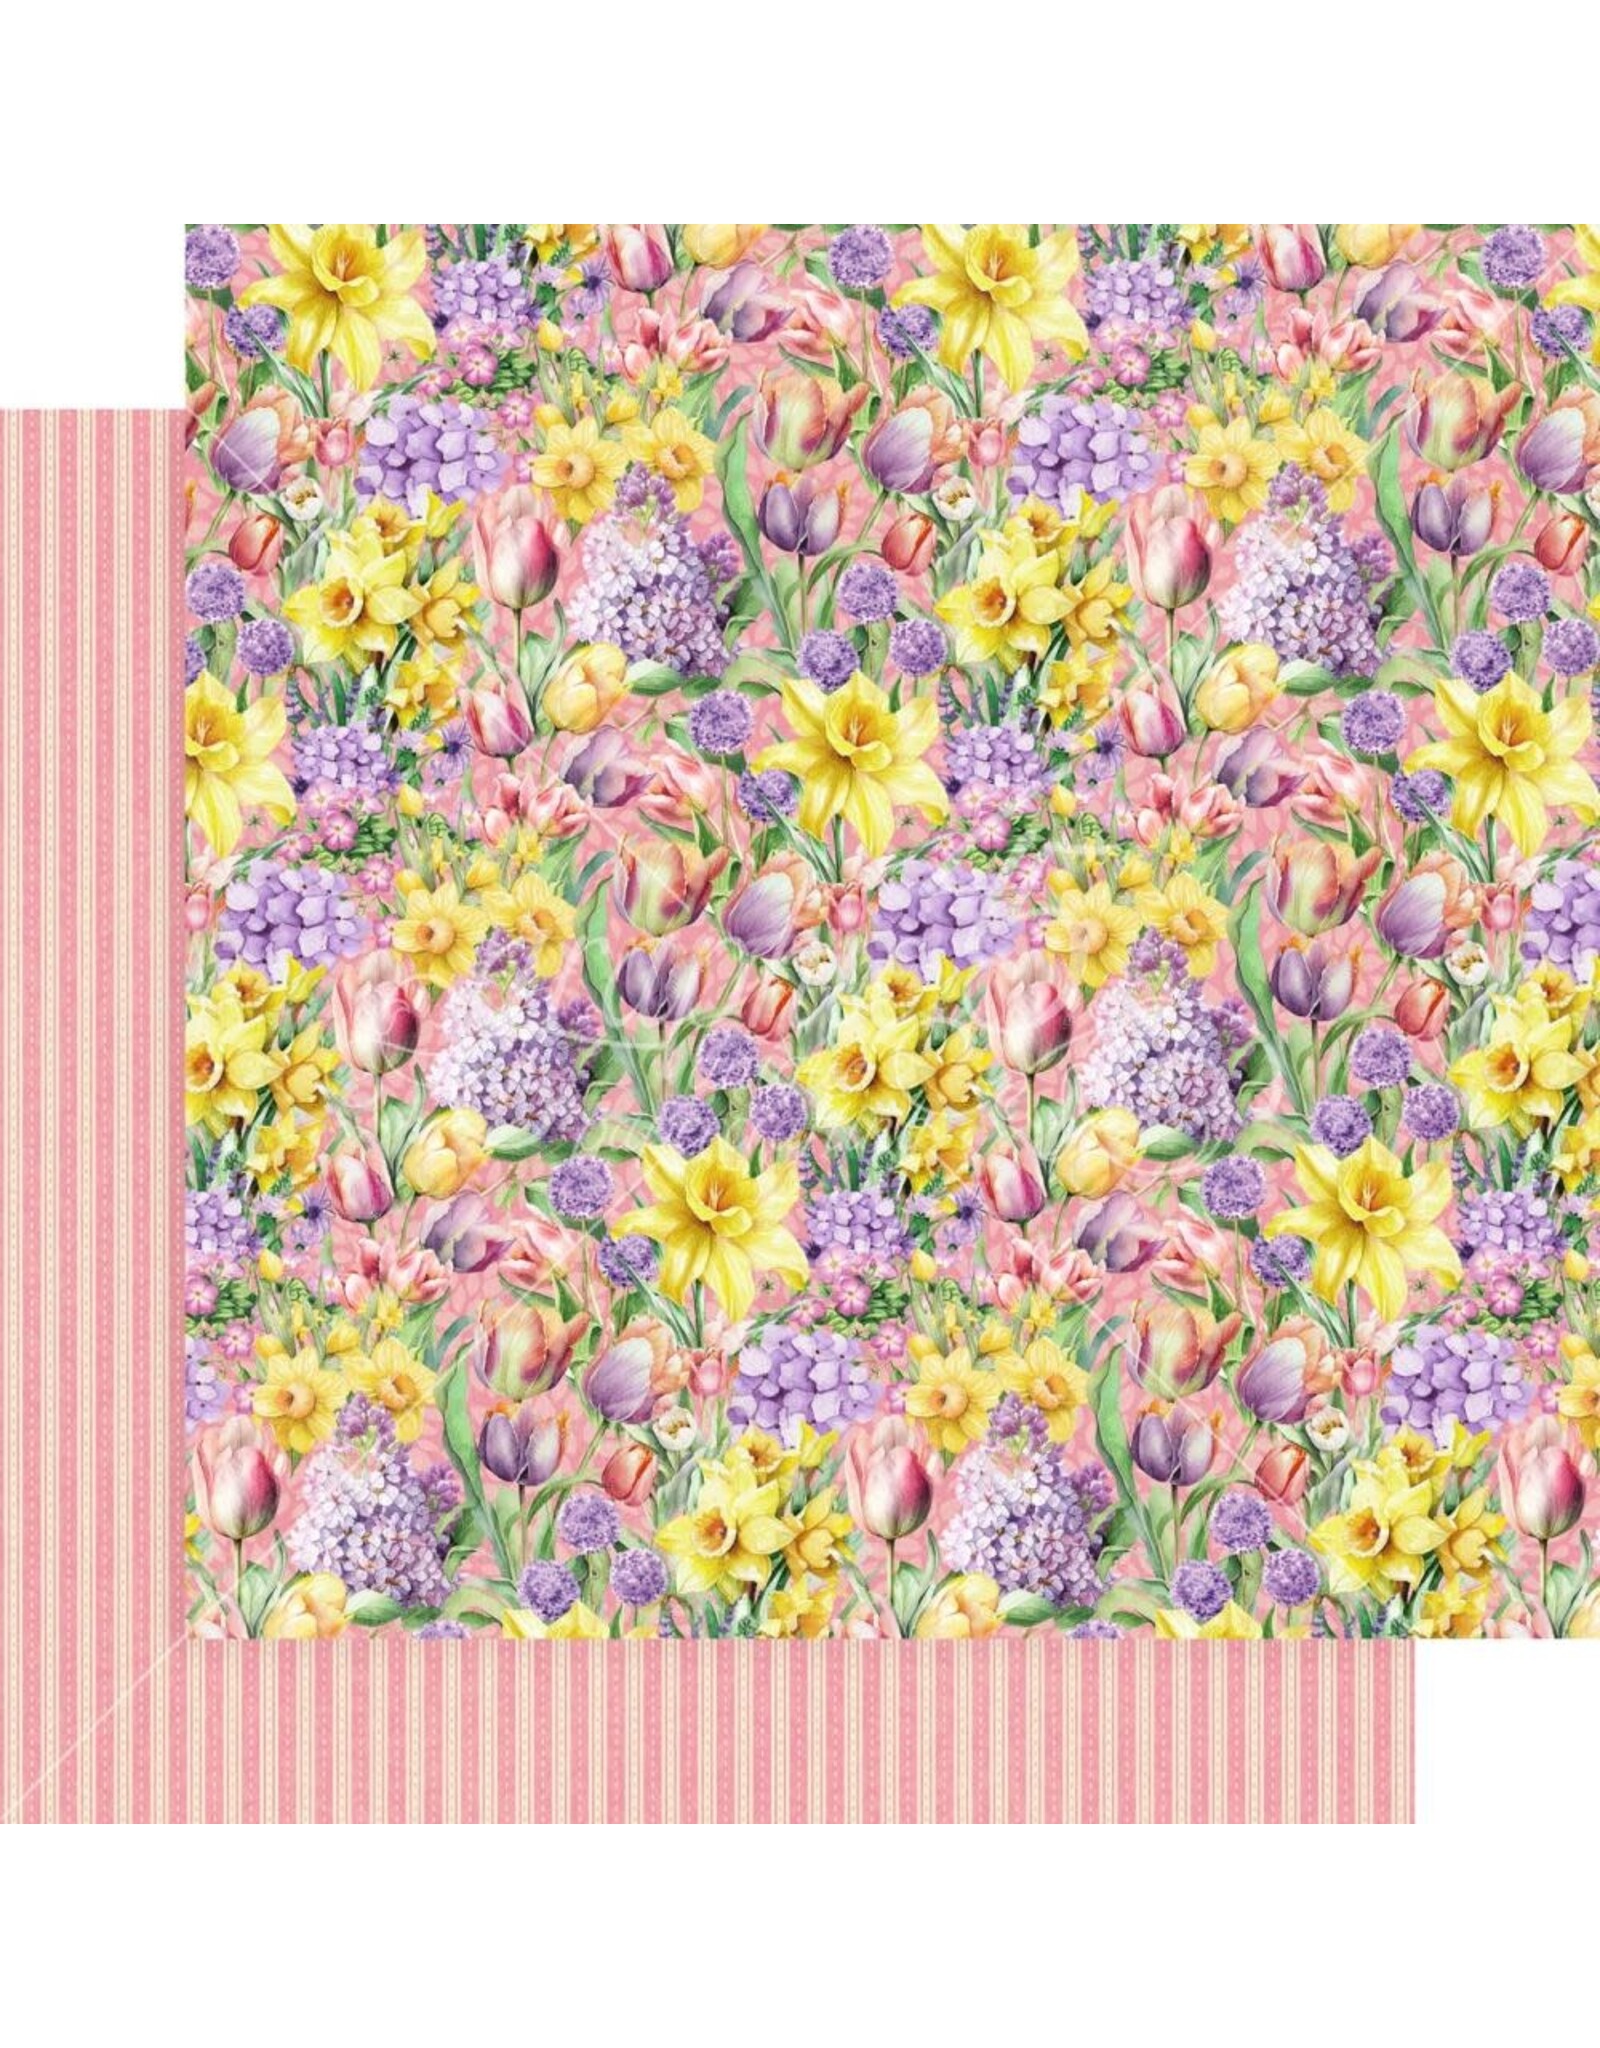 GRAPHIC 45 GRAPHIC 45 GROW WITH LOVE COLLECTION BLOOMING BEAUTY 12x12 CARDSTOCK